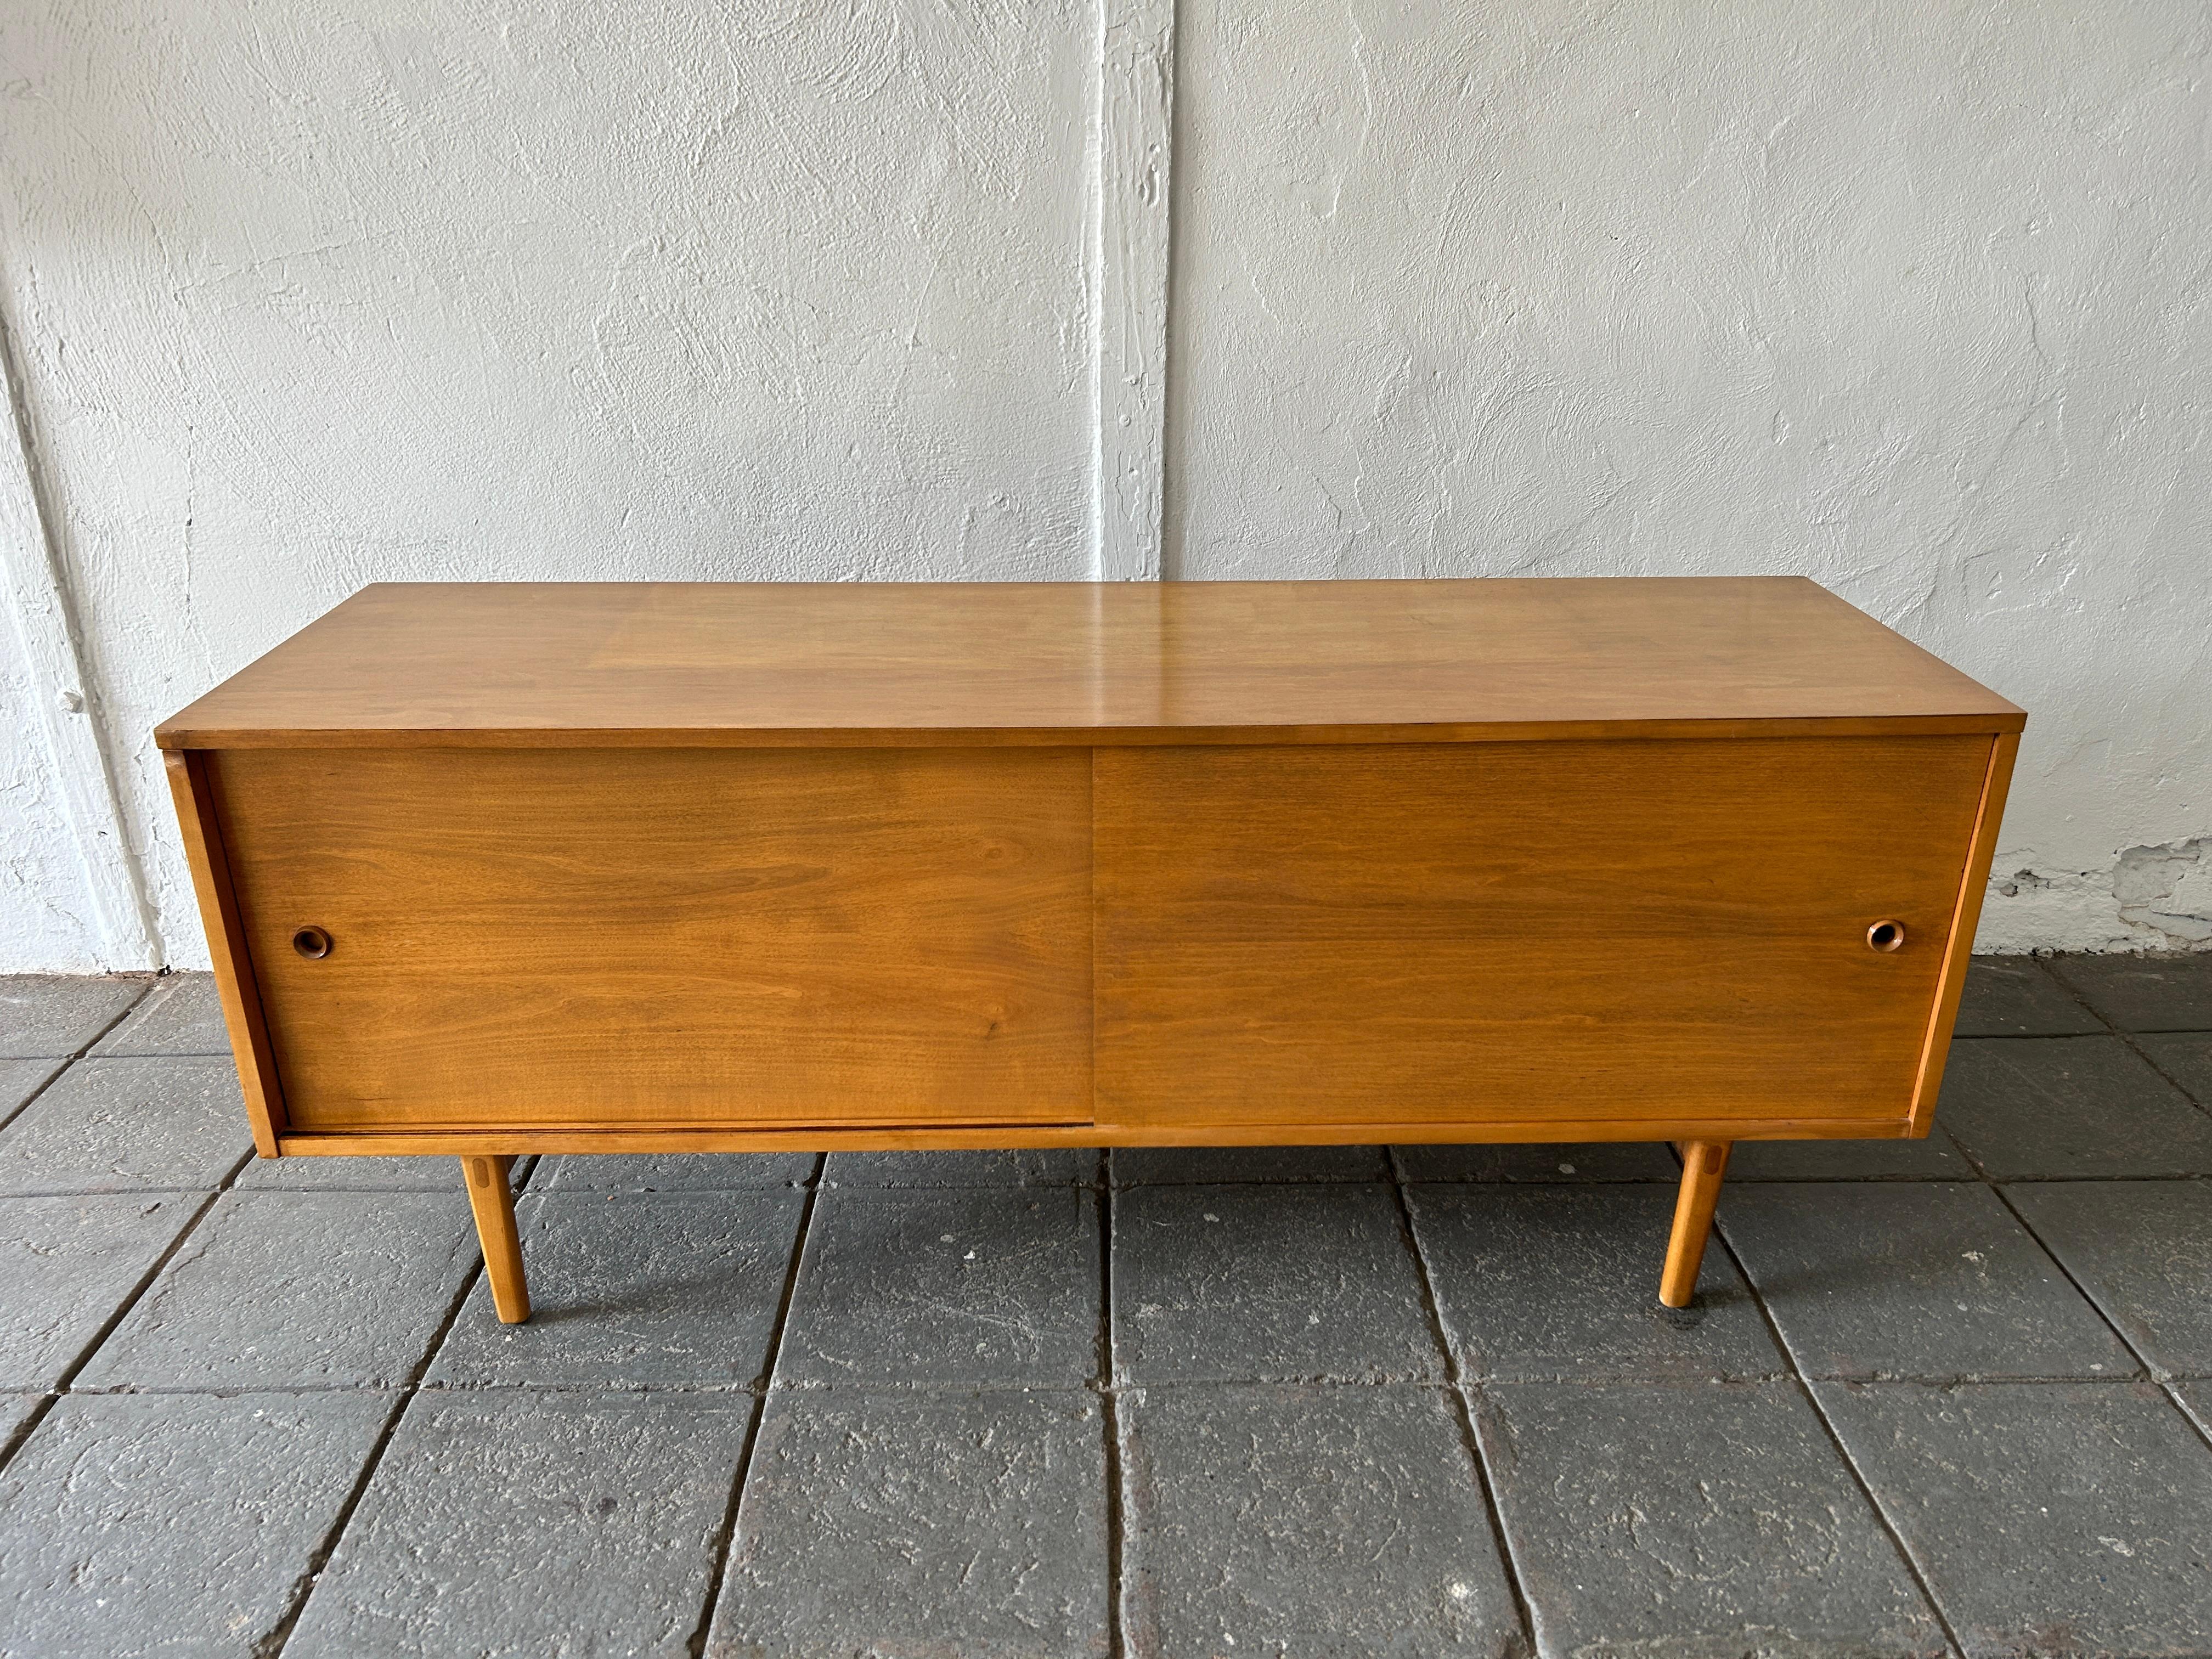 Beautiful mid-century low credenza cabinet with blonde maple sliding doors by Paul McCobb circa 1950 planner group #1513 has 2 adjustable shelves with pins - solid maple construction has a blonde maple finish. All original wood sliding front doors